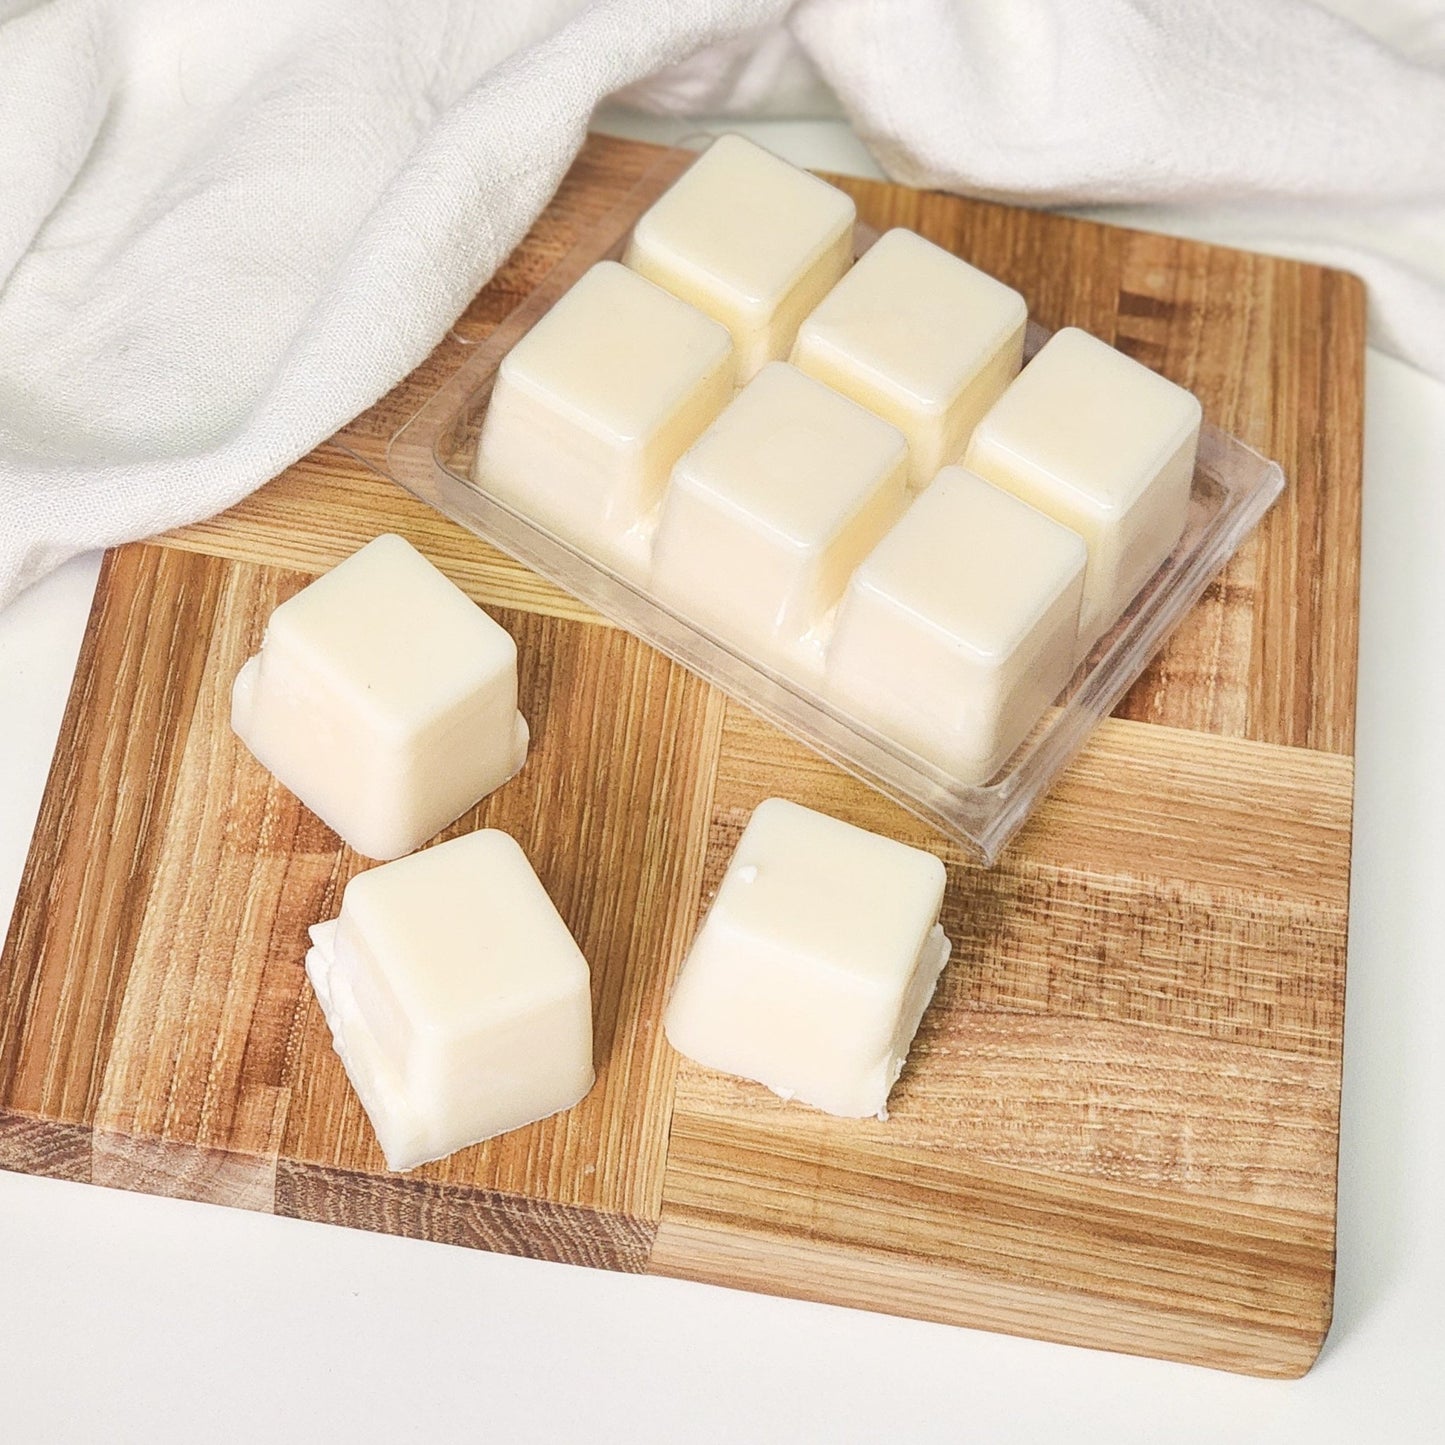 Lemon and Sugar Cookie Soy Wax Melts - Abboo Candle Co